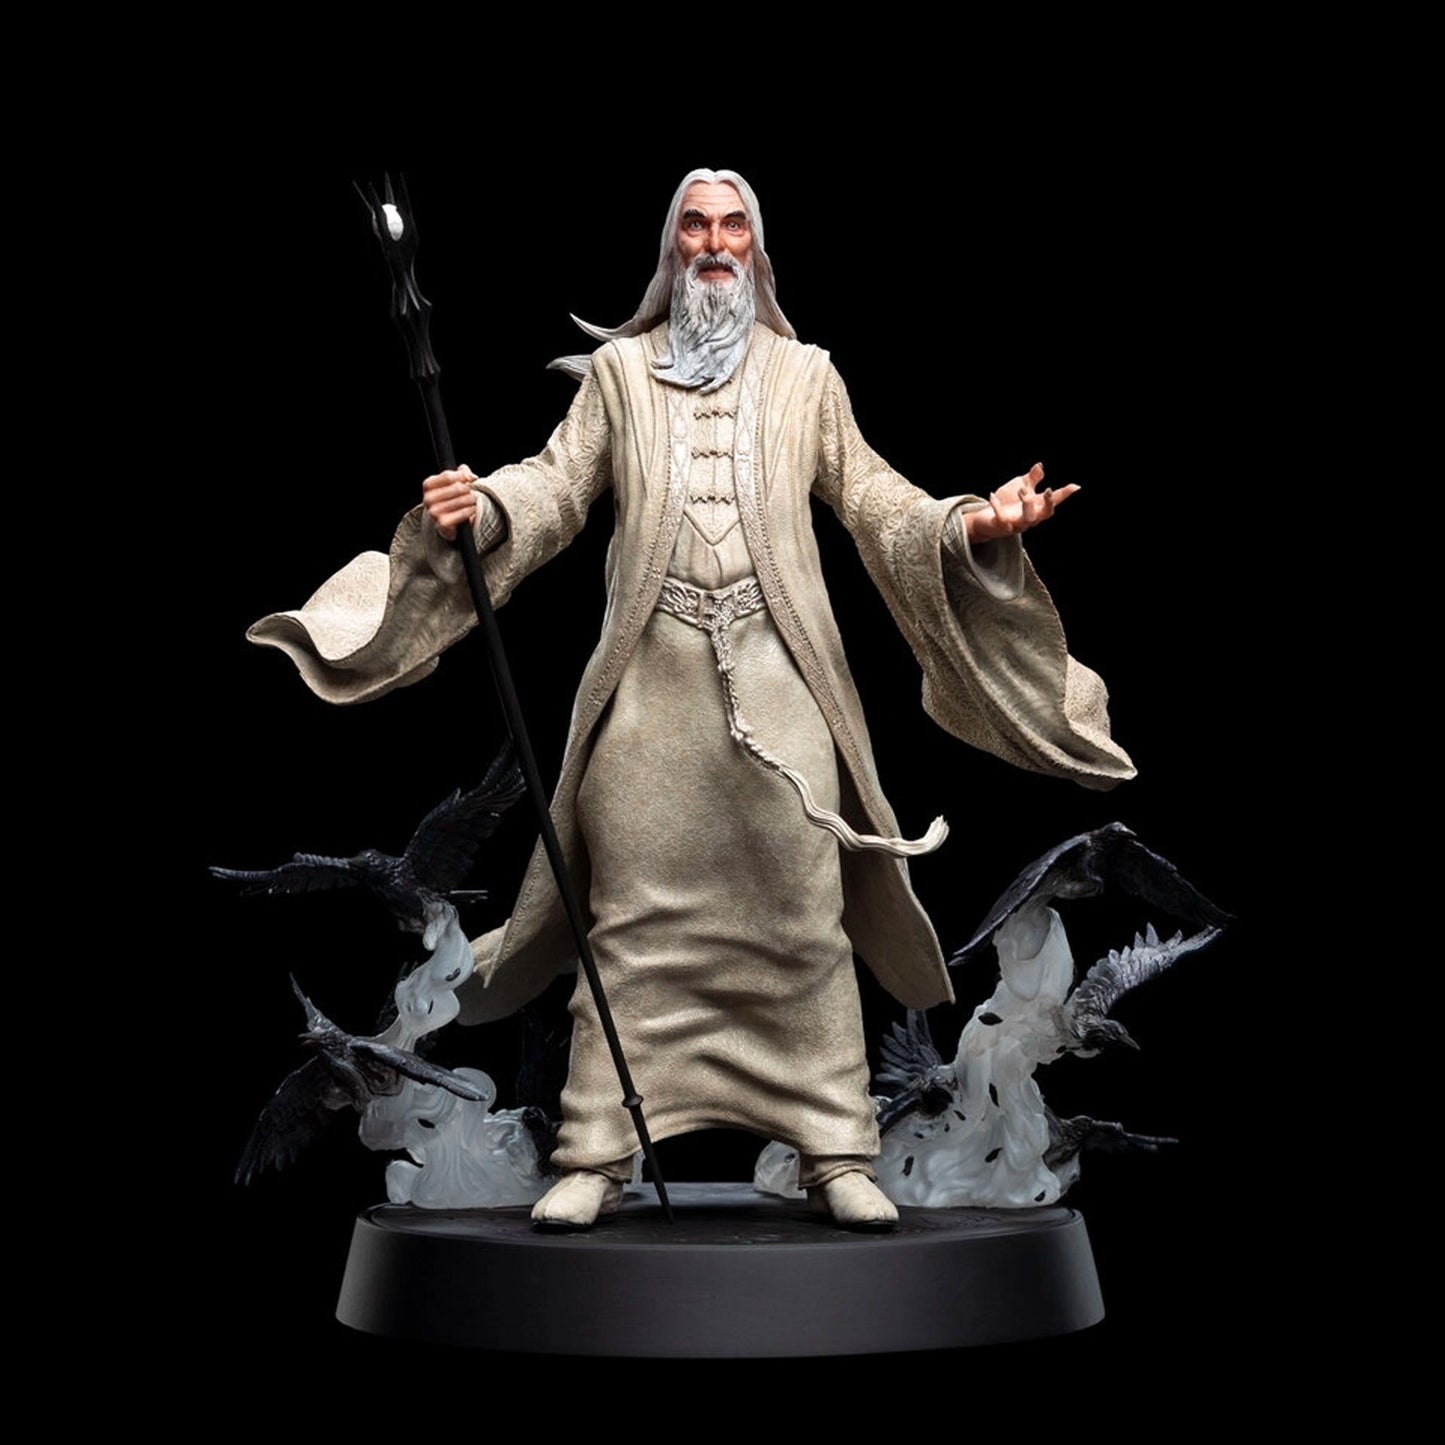 Saruman the White (The Lord of the Rings) Figures of Fandom Statue by Weta Workshop